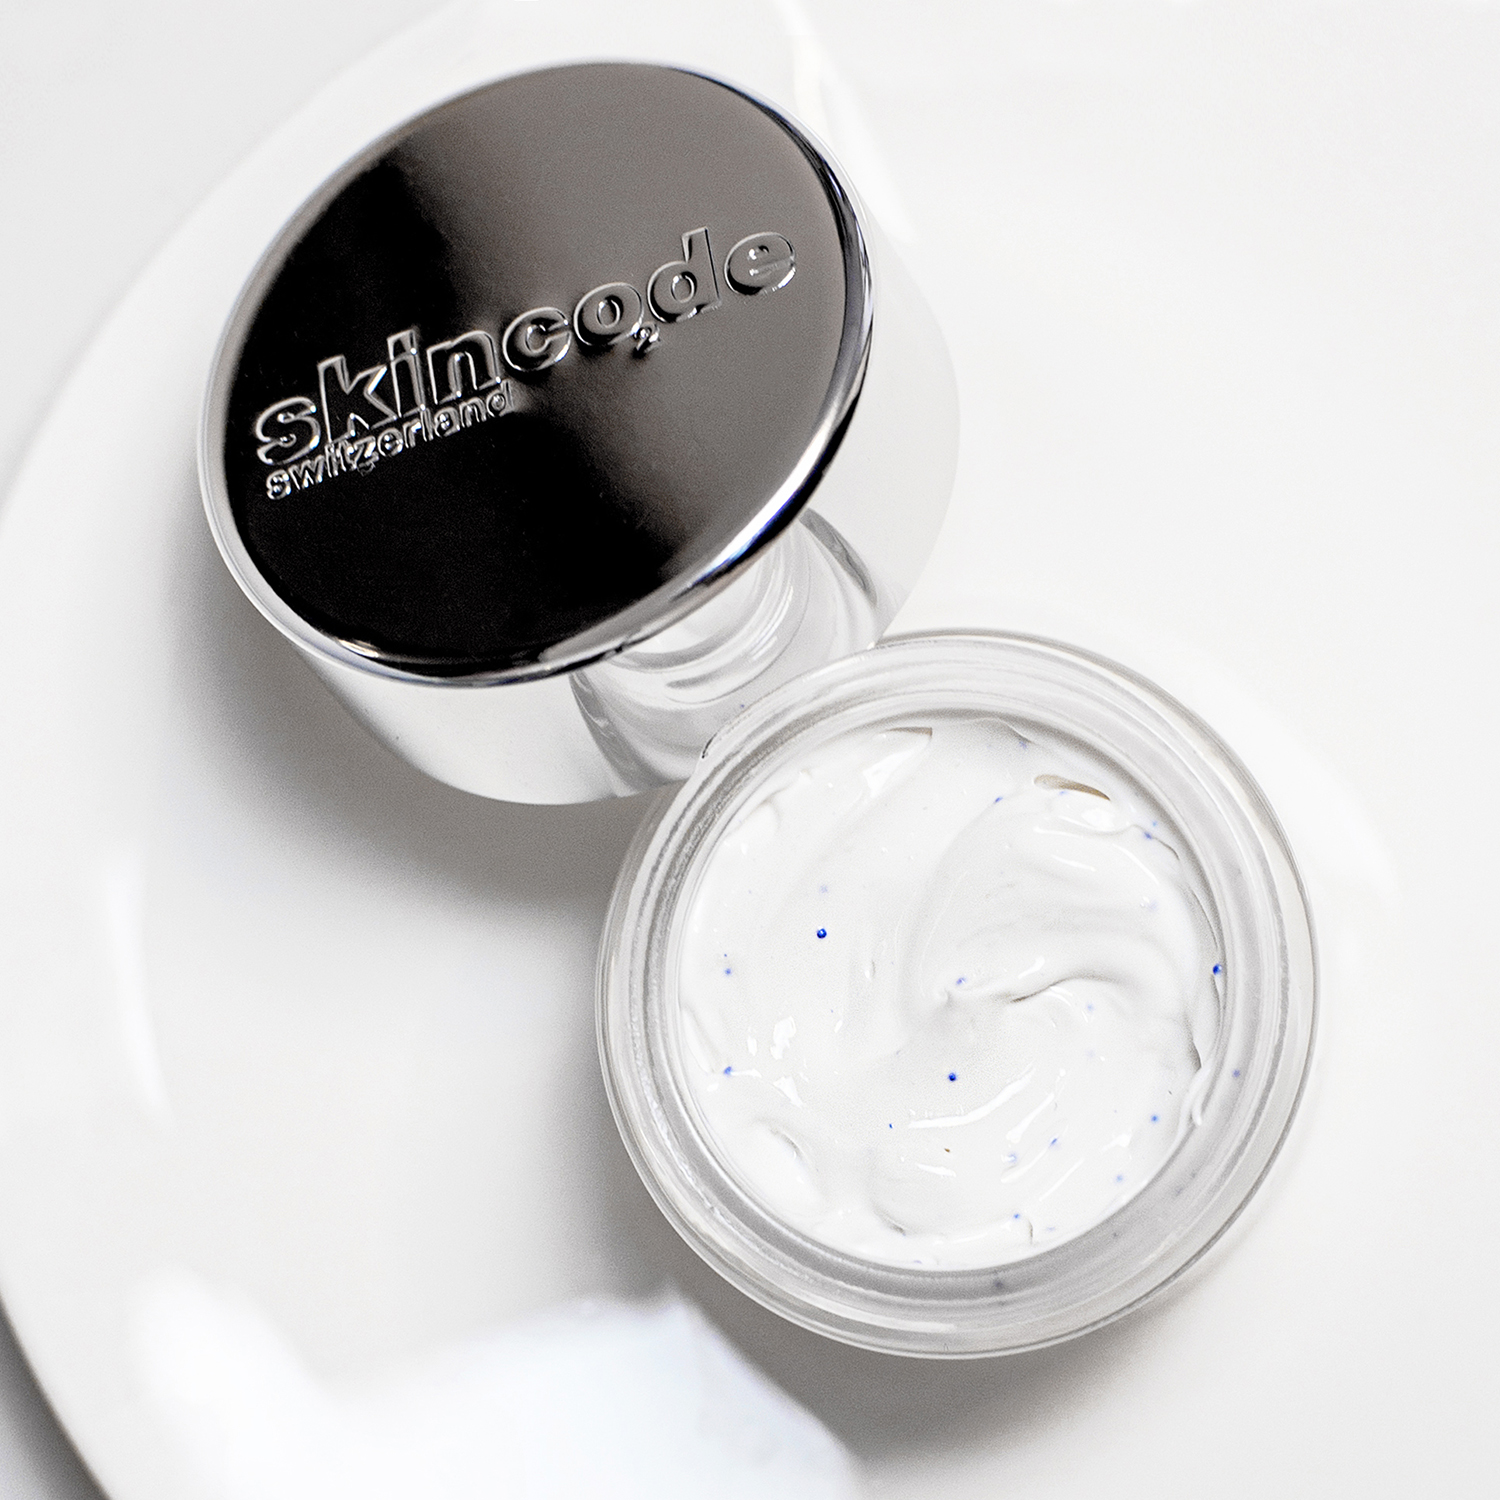 Skincode cellular anti-aging cream review)